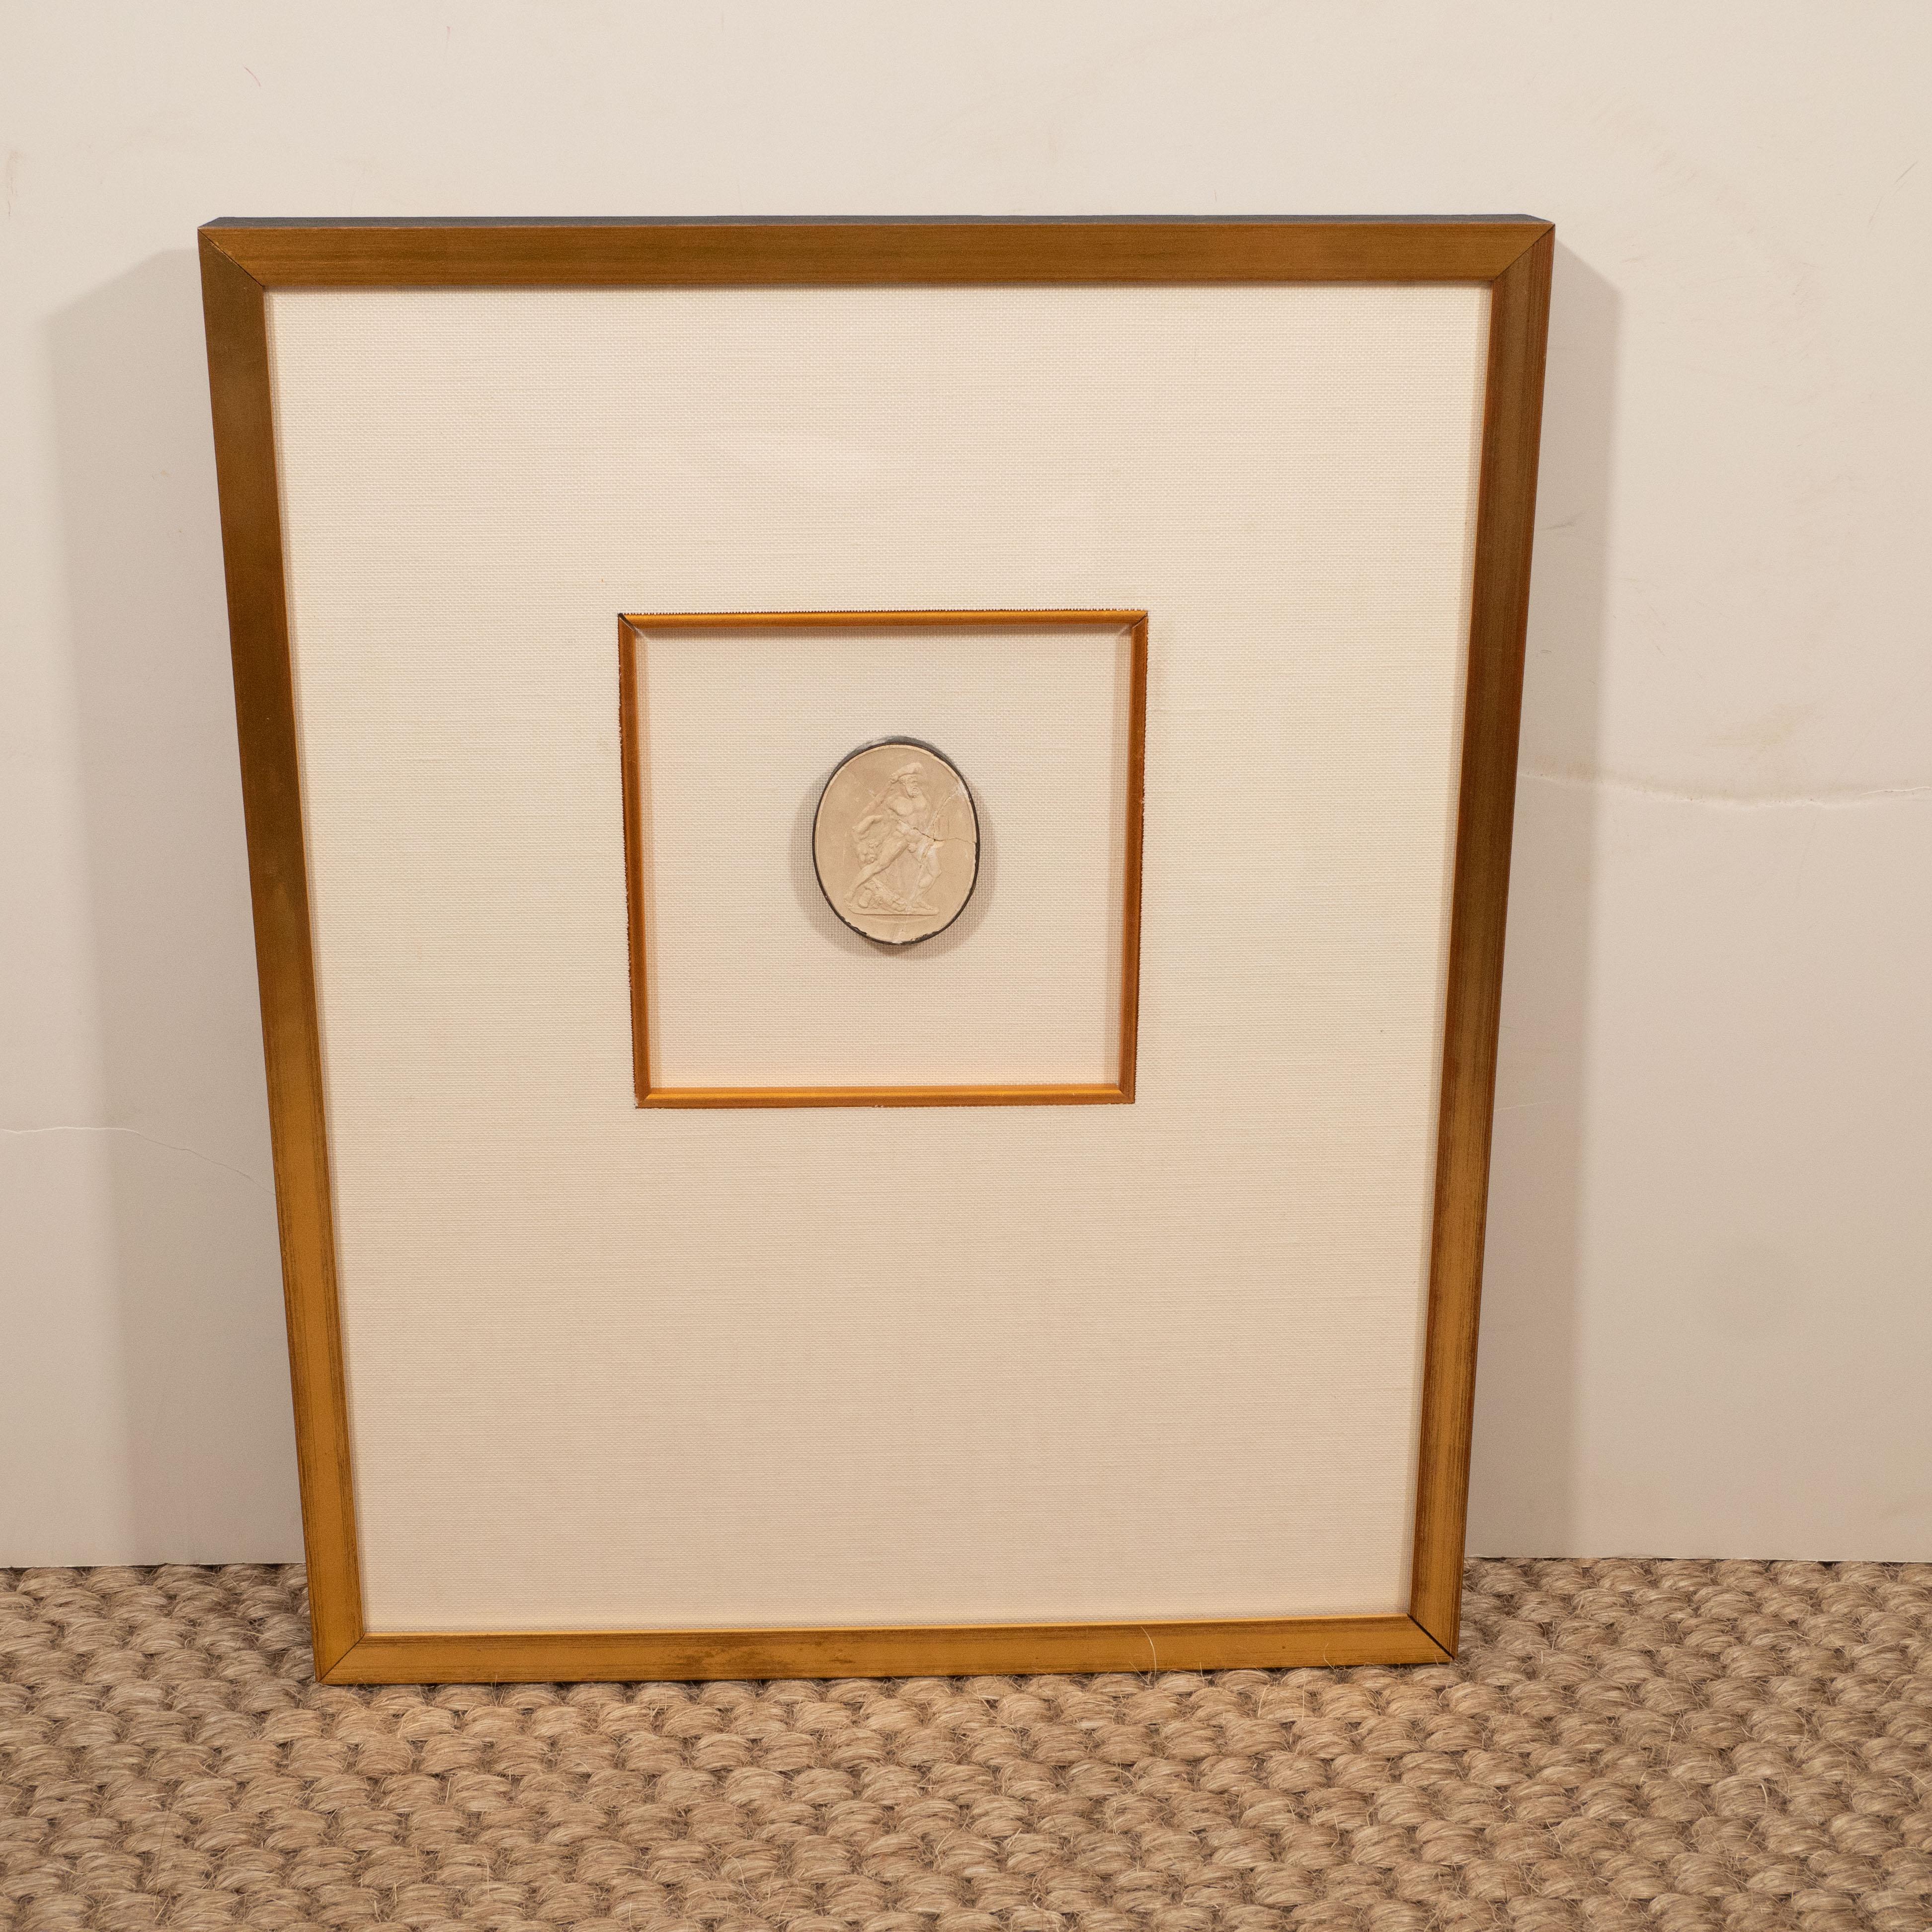 A plaster intaglio matted in linen and framed in gold frames with a lovely inner gold fillet. Neutral in color, this piece adds a quiet elegance to a room.